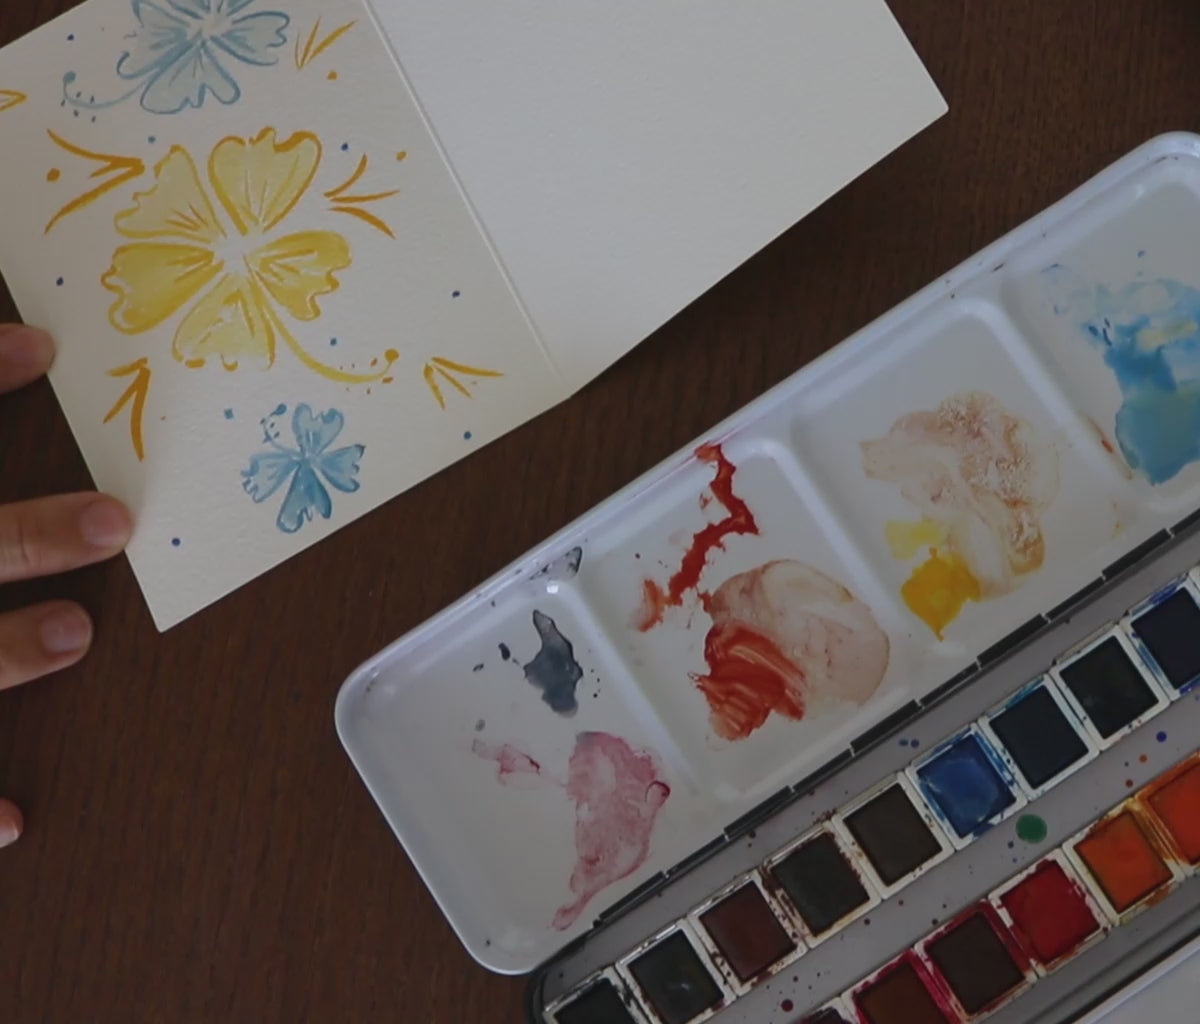 Watercolor Cards and Envelopes